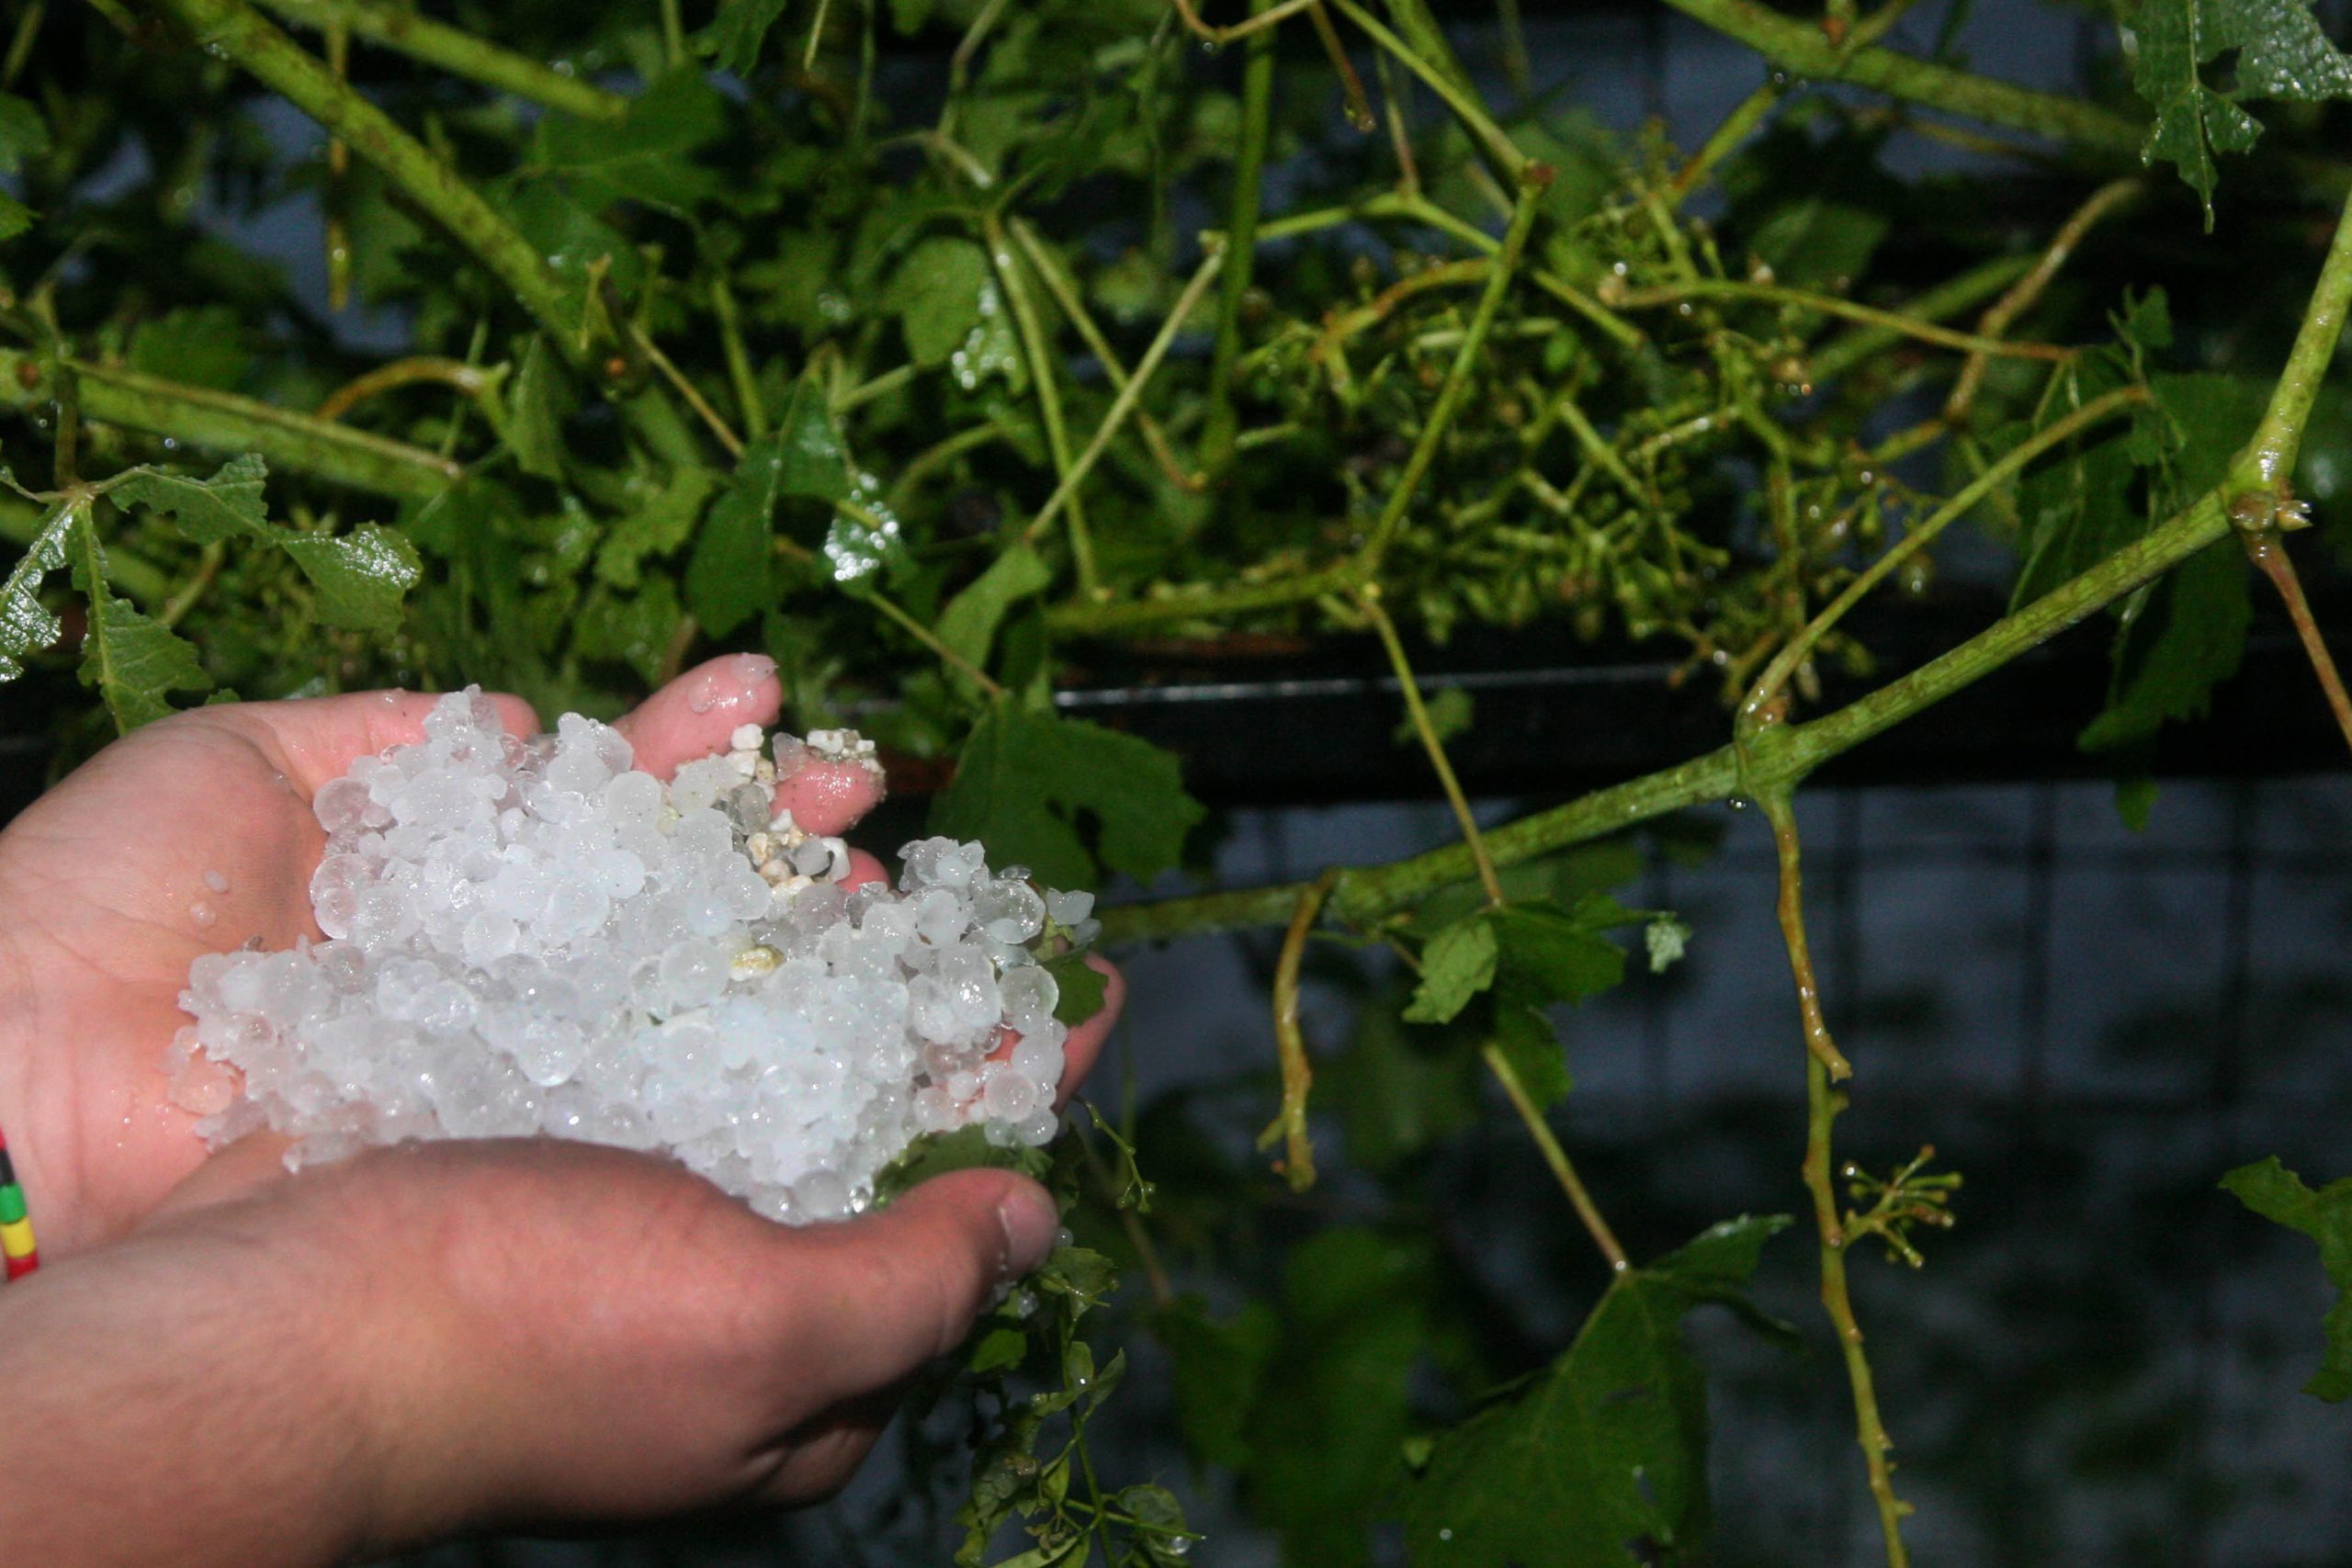 National Observatory of Athens: What causes hail this time of year